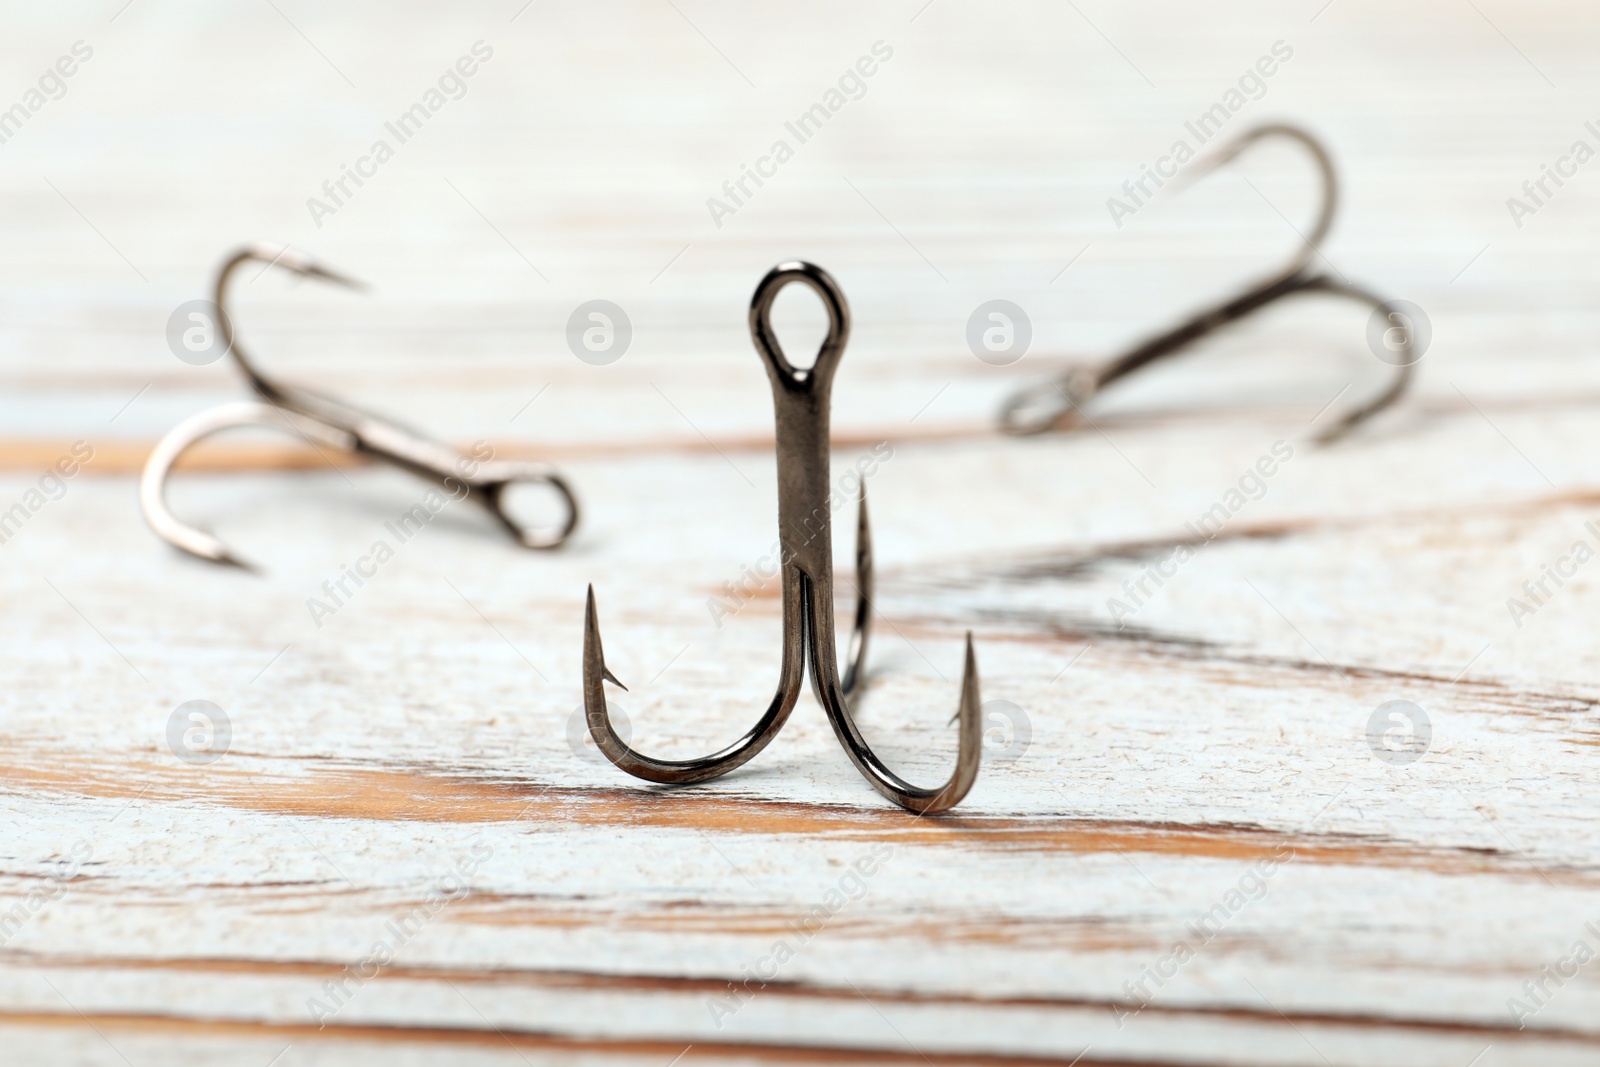 Photo of Fishing hooks on wooden table. Angling equipment